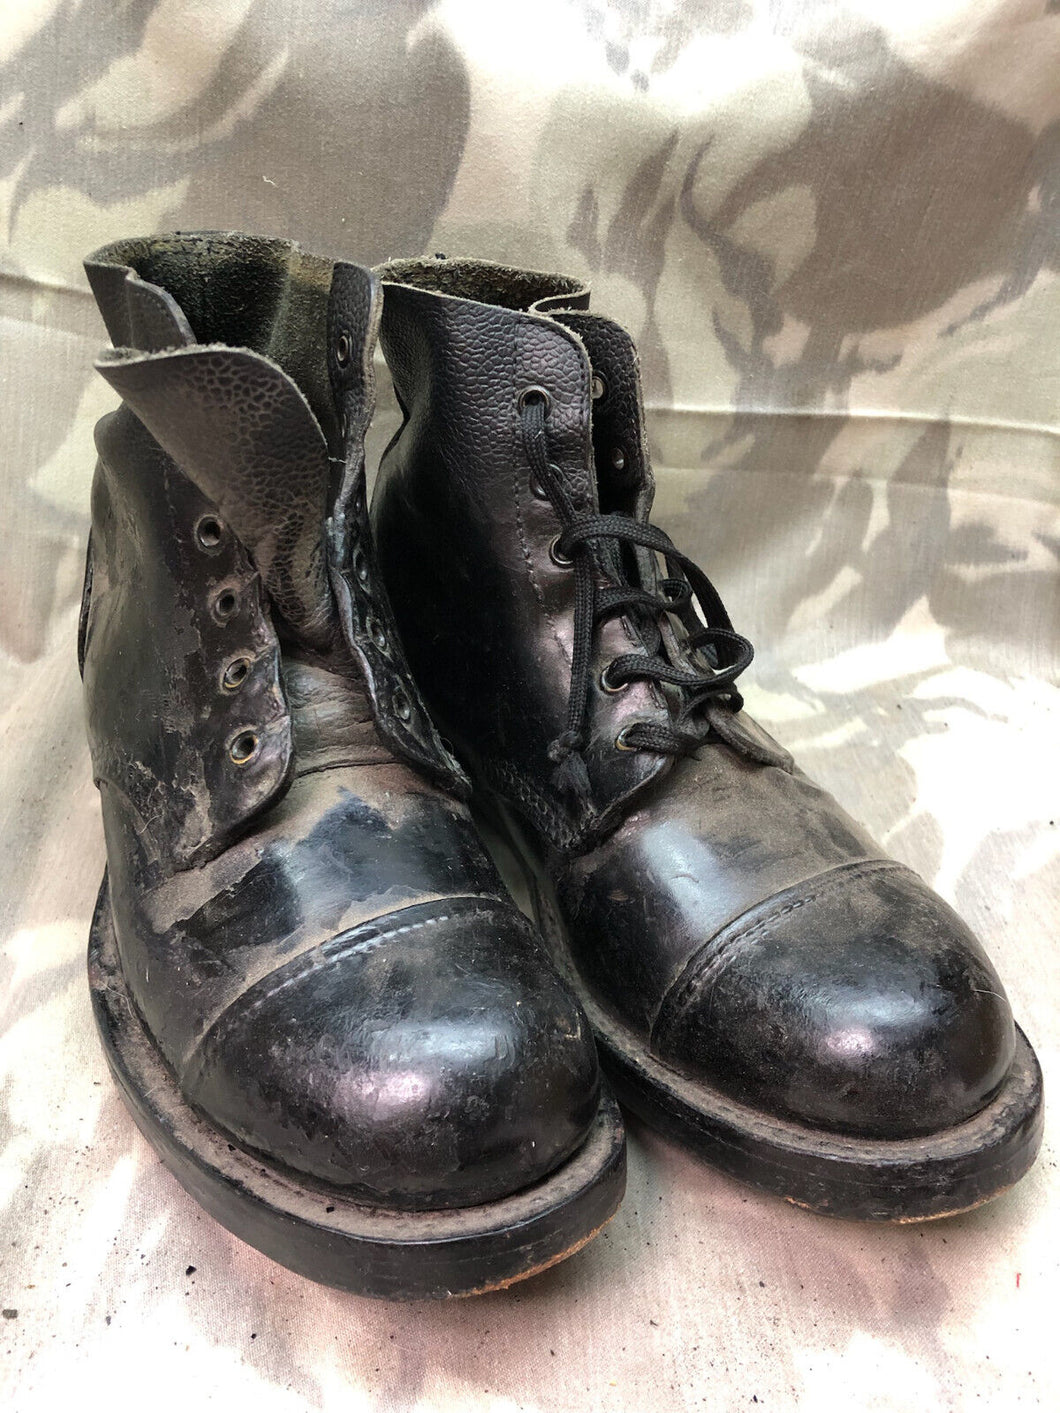 Original British Army Hobnailed Soldiers Ankle Ammo Boots WW2 Style - Size 8M